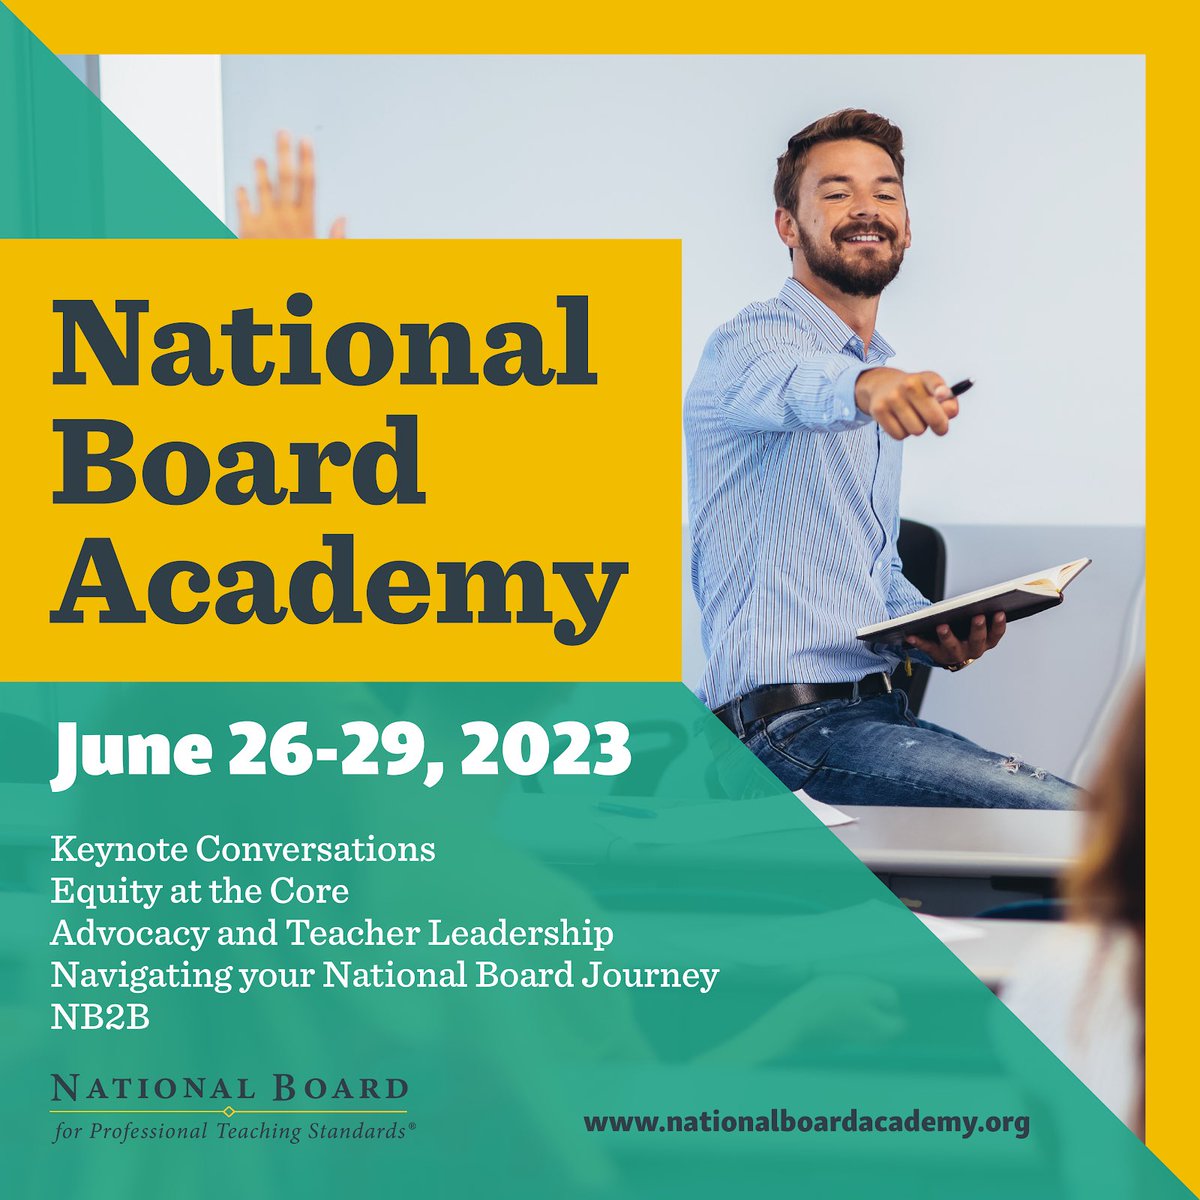 I am excited to be part of the Maintenance of Certification Session on June 27 at 3:30 pm as part of the @NBPTS #NBAcademy. Learn more about this free, four-day virtual conference open to all educators: nationalboardacademy.org